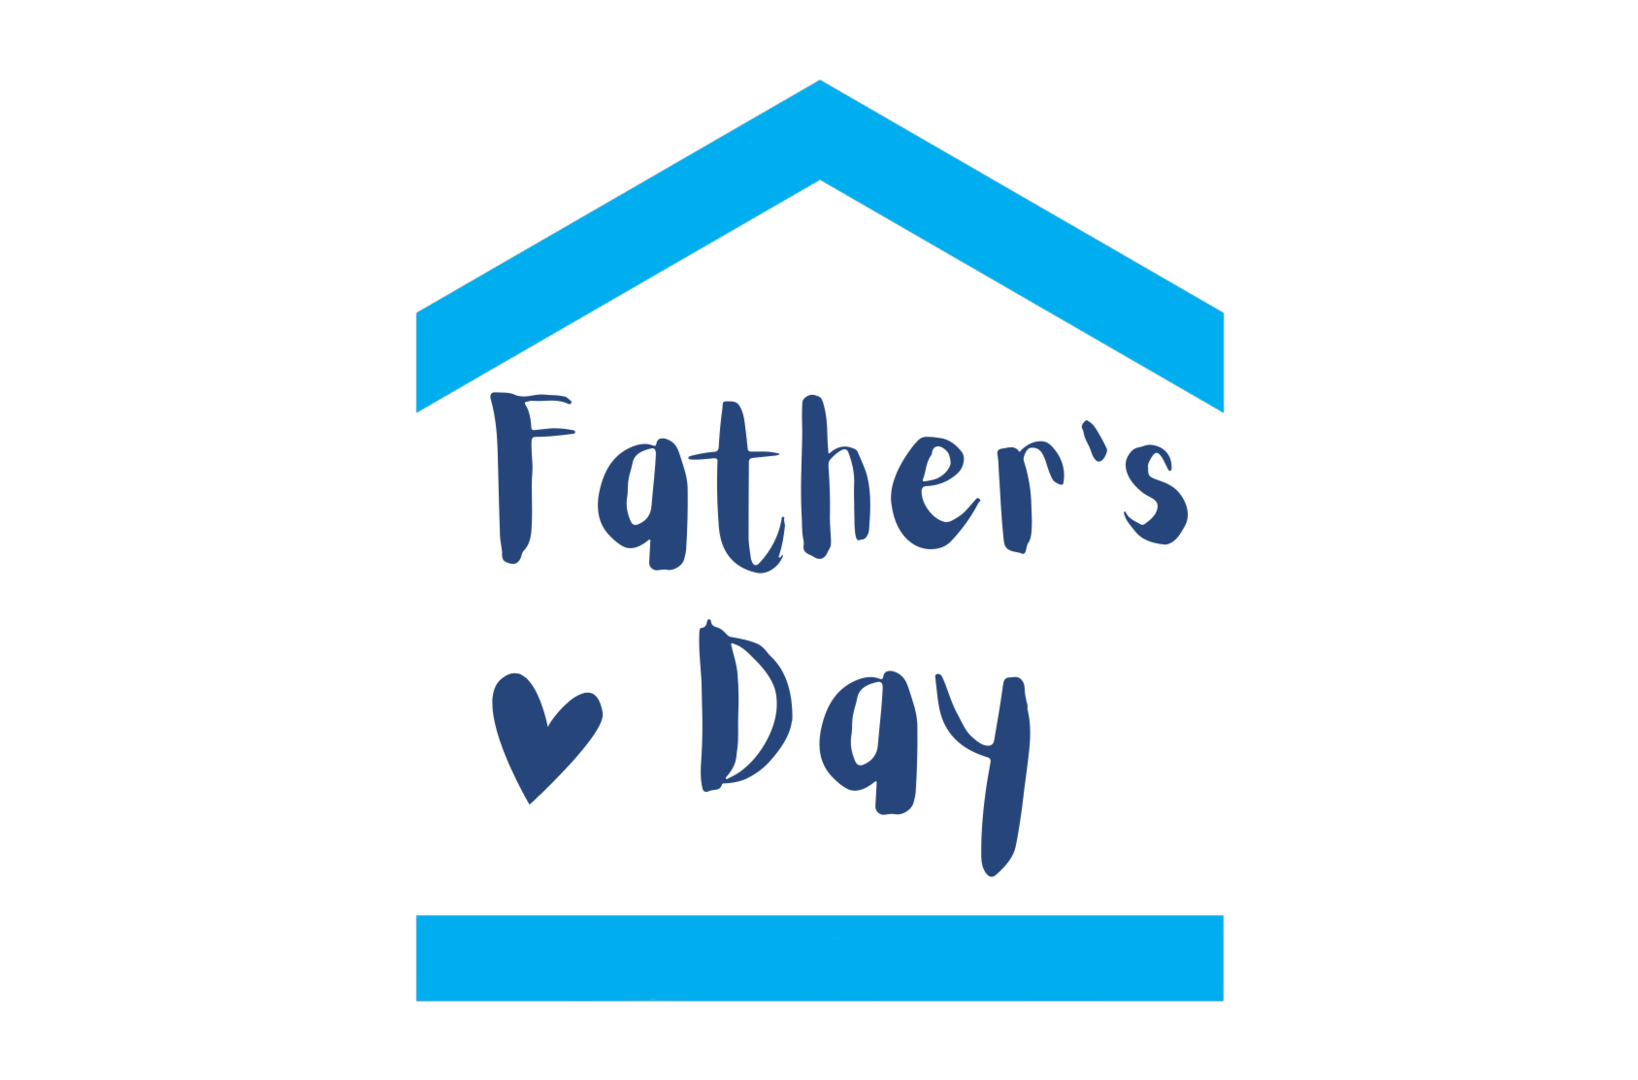 'Father's Day' text in a house